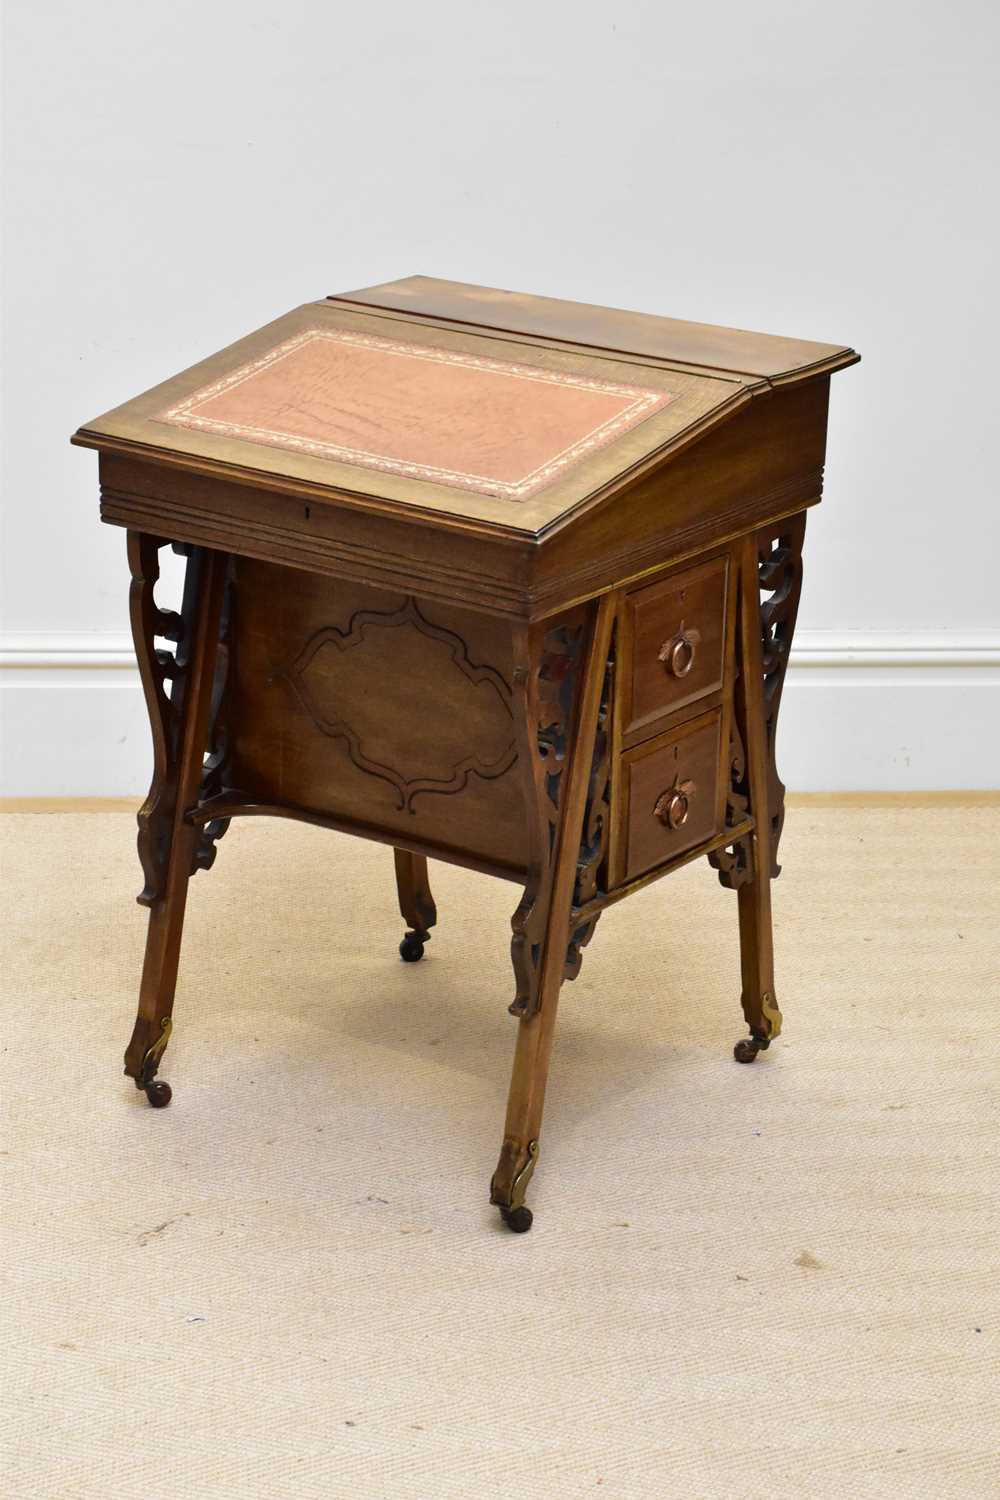 An Edwardian mahogany Davenport style desk, with two drawers and two faux drawers, with fitted